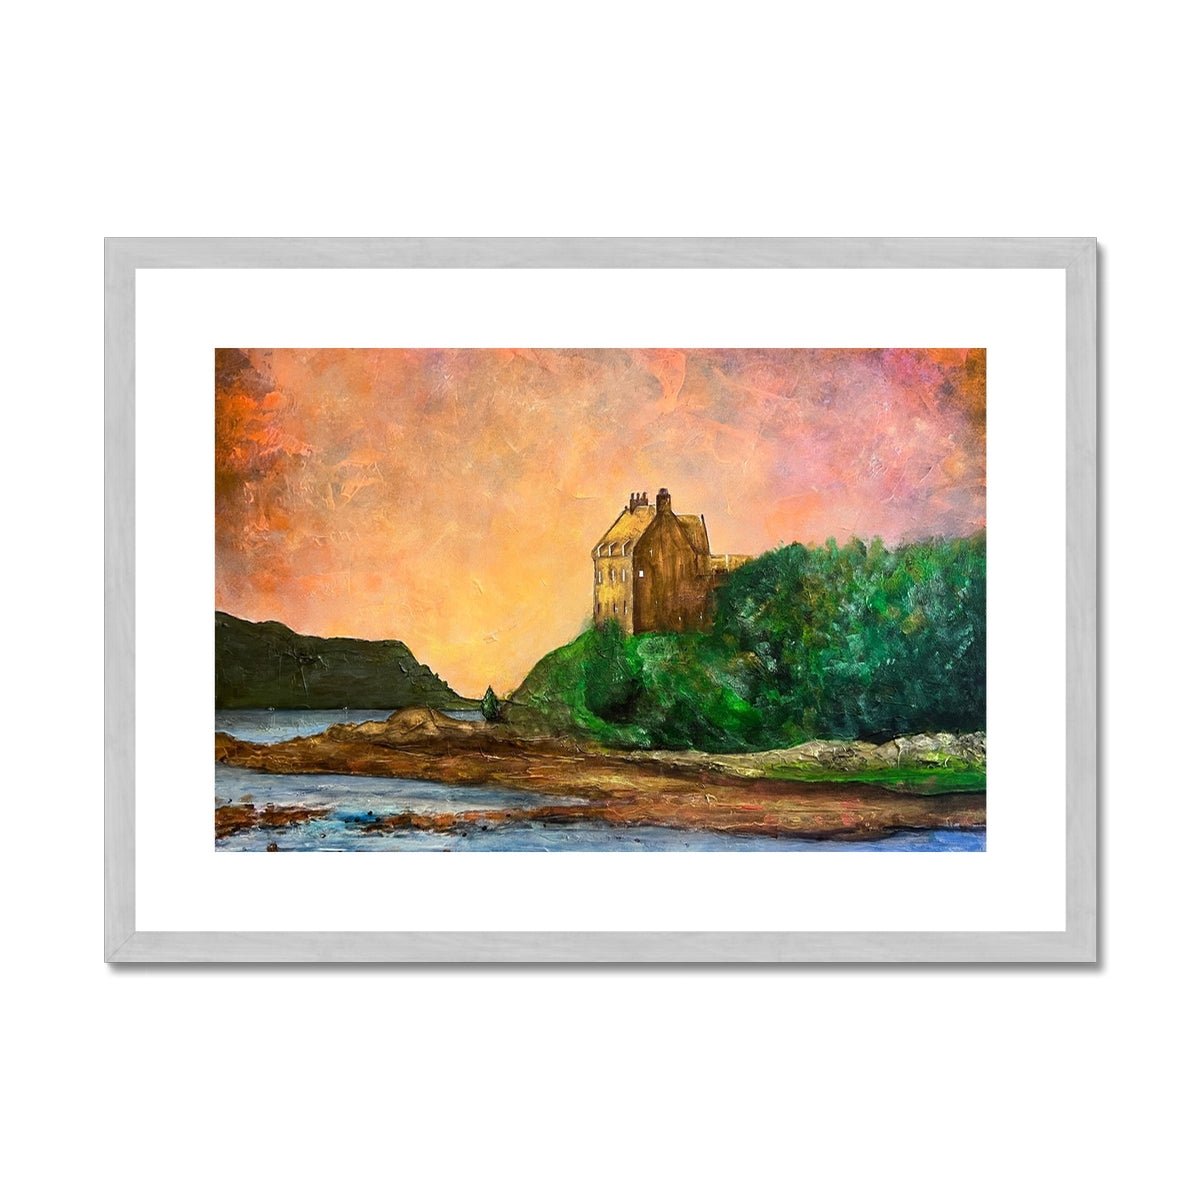 Duntrune Castle Painting | Antique Framed & Mounted Prints From Scotland-Antique Framed & Mounted Prints-Historic & Iconic Scotland Art Gallery-A2 Landscape-Silver Frame-Paintings, Prints, Homeware, Art Gifts From Scotland By Scottish Artist Kevin Hunter